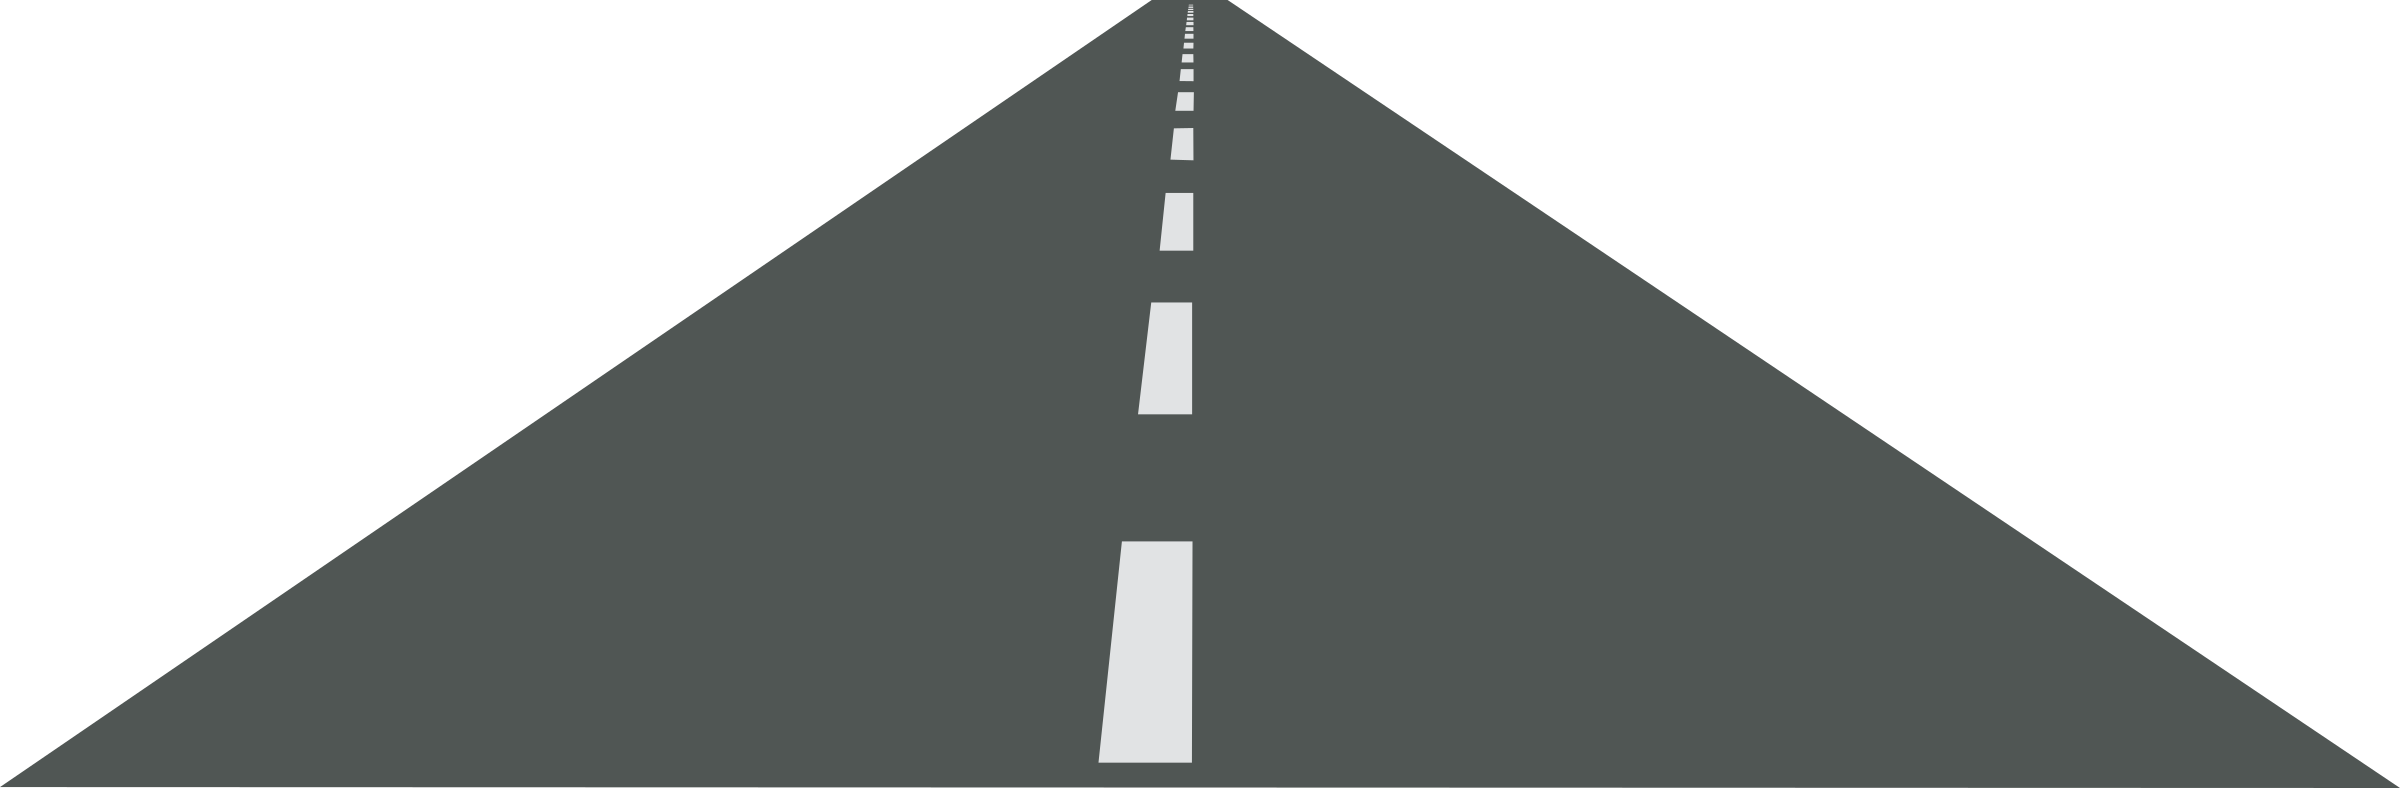 road clipart png - photo #29